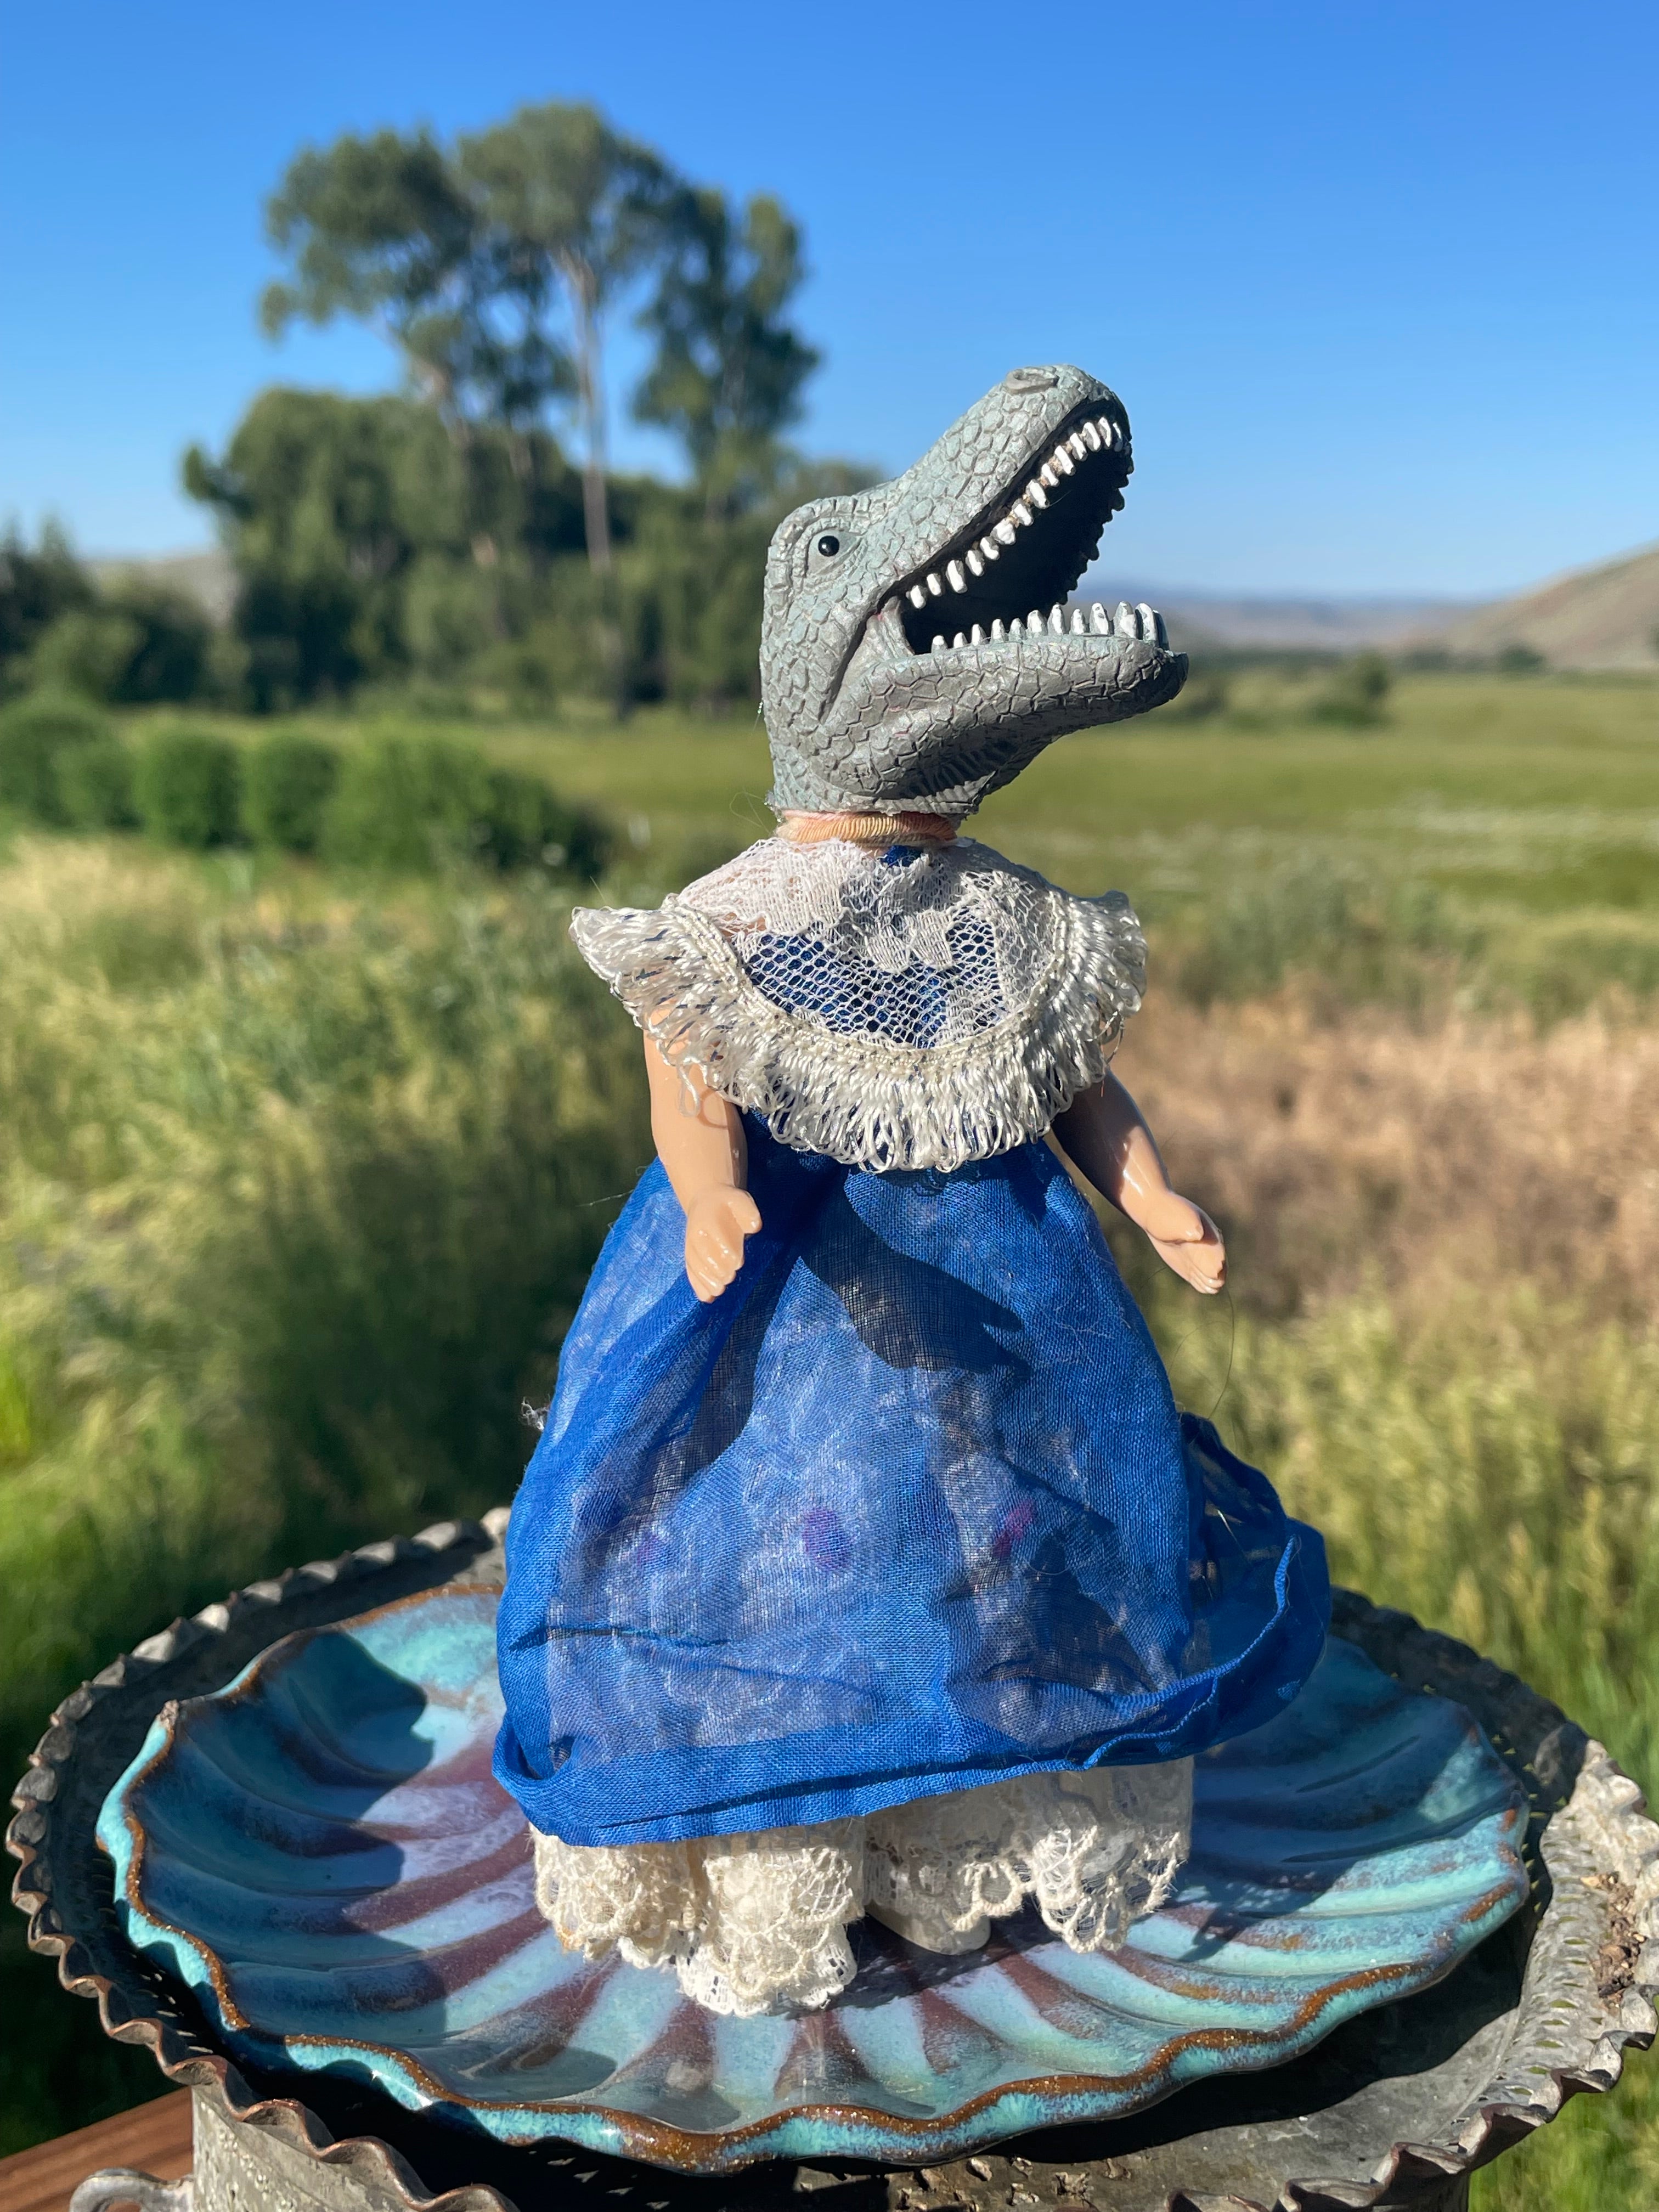 Vintage toy doll with a dinosaur head. Hand dyed blue gauze skirt over a lace pinafore with a lace bib collar. 6" tall x 3" wide.